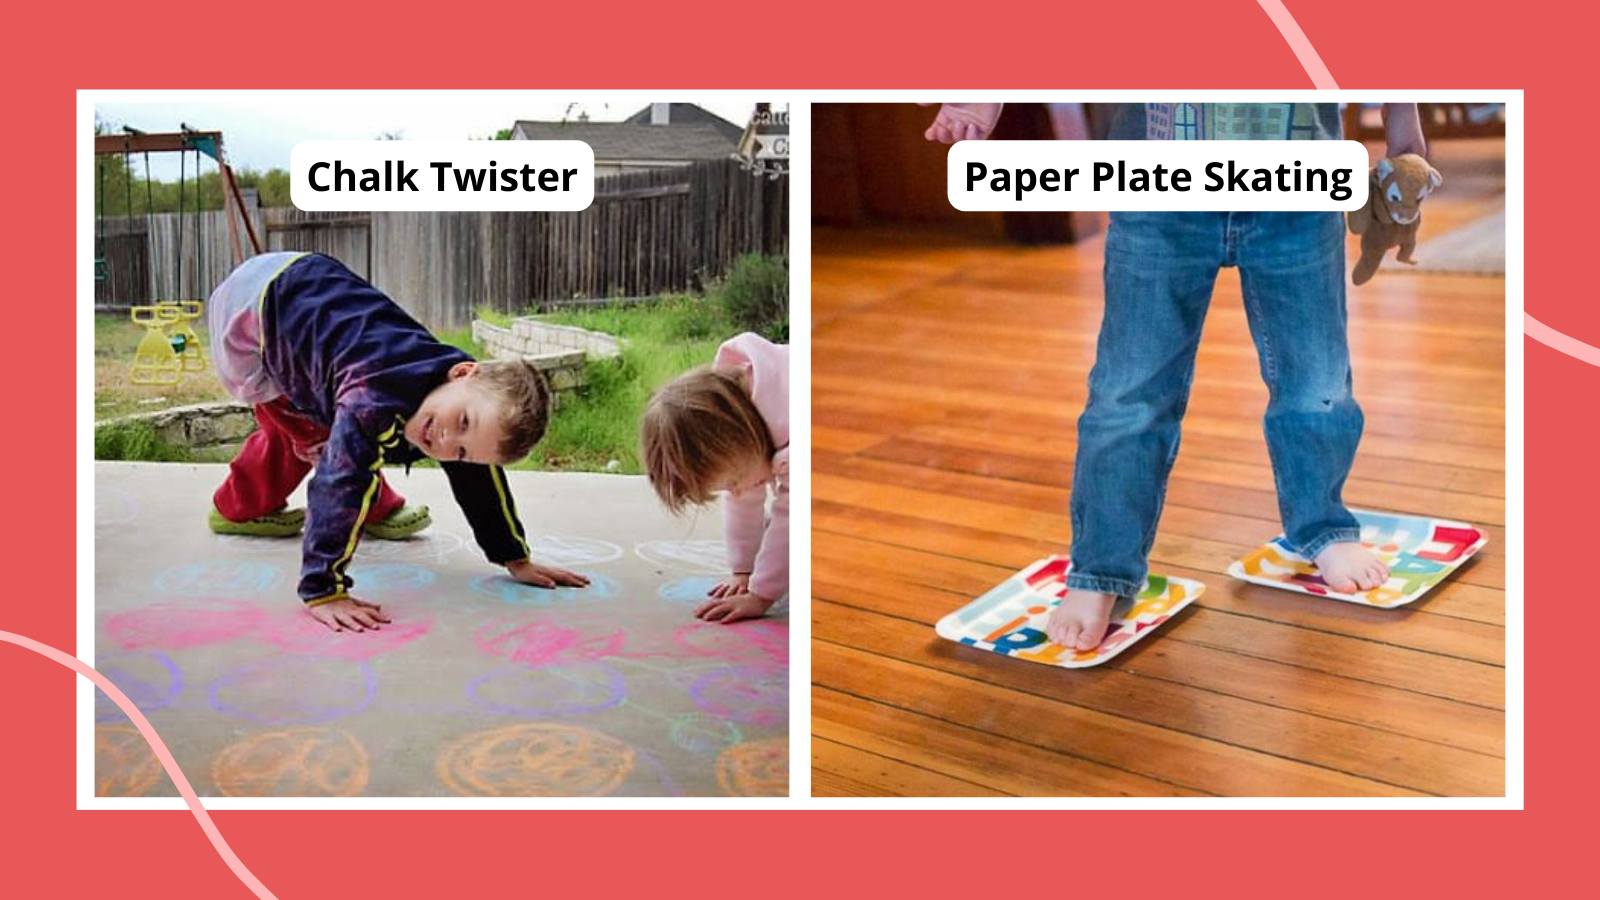 Gross motor activities, including kids playing chalk Twister and a child skating on paper plates in bare feet on the wood floor.